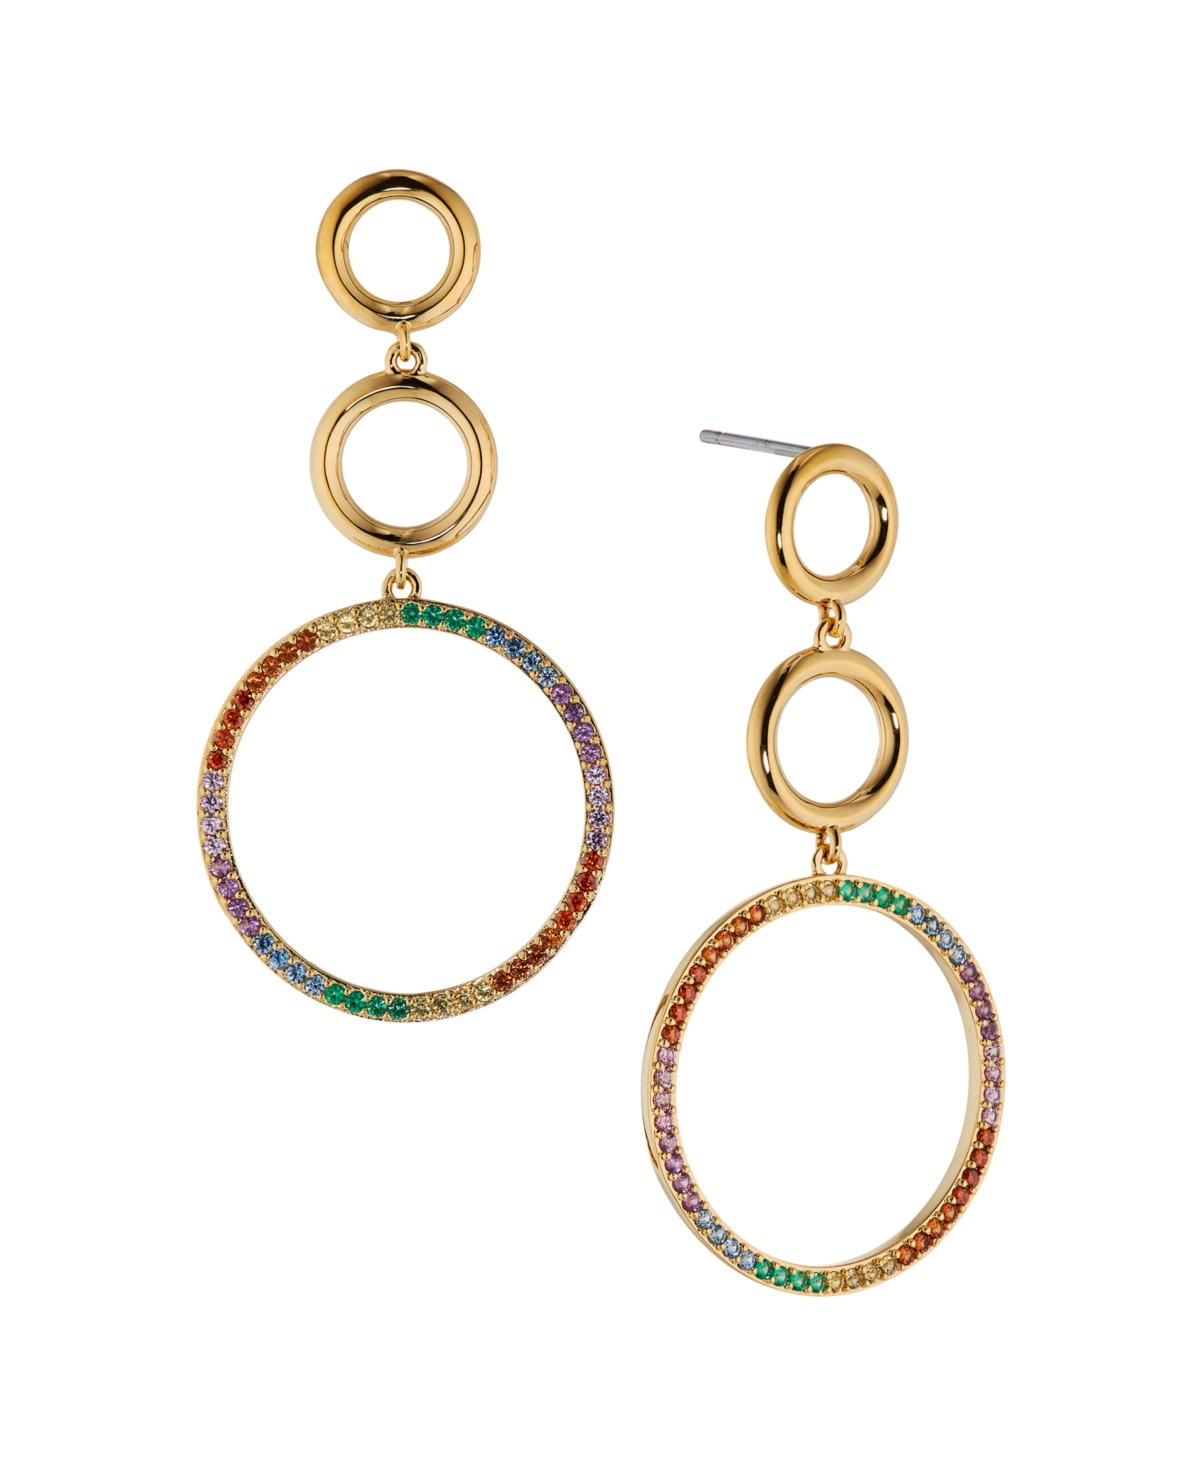 Ava Nadri Multi Color Circle Drop Earring In 18k Gold Plated Brass In Multi/ K Gold Plated